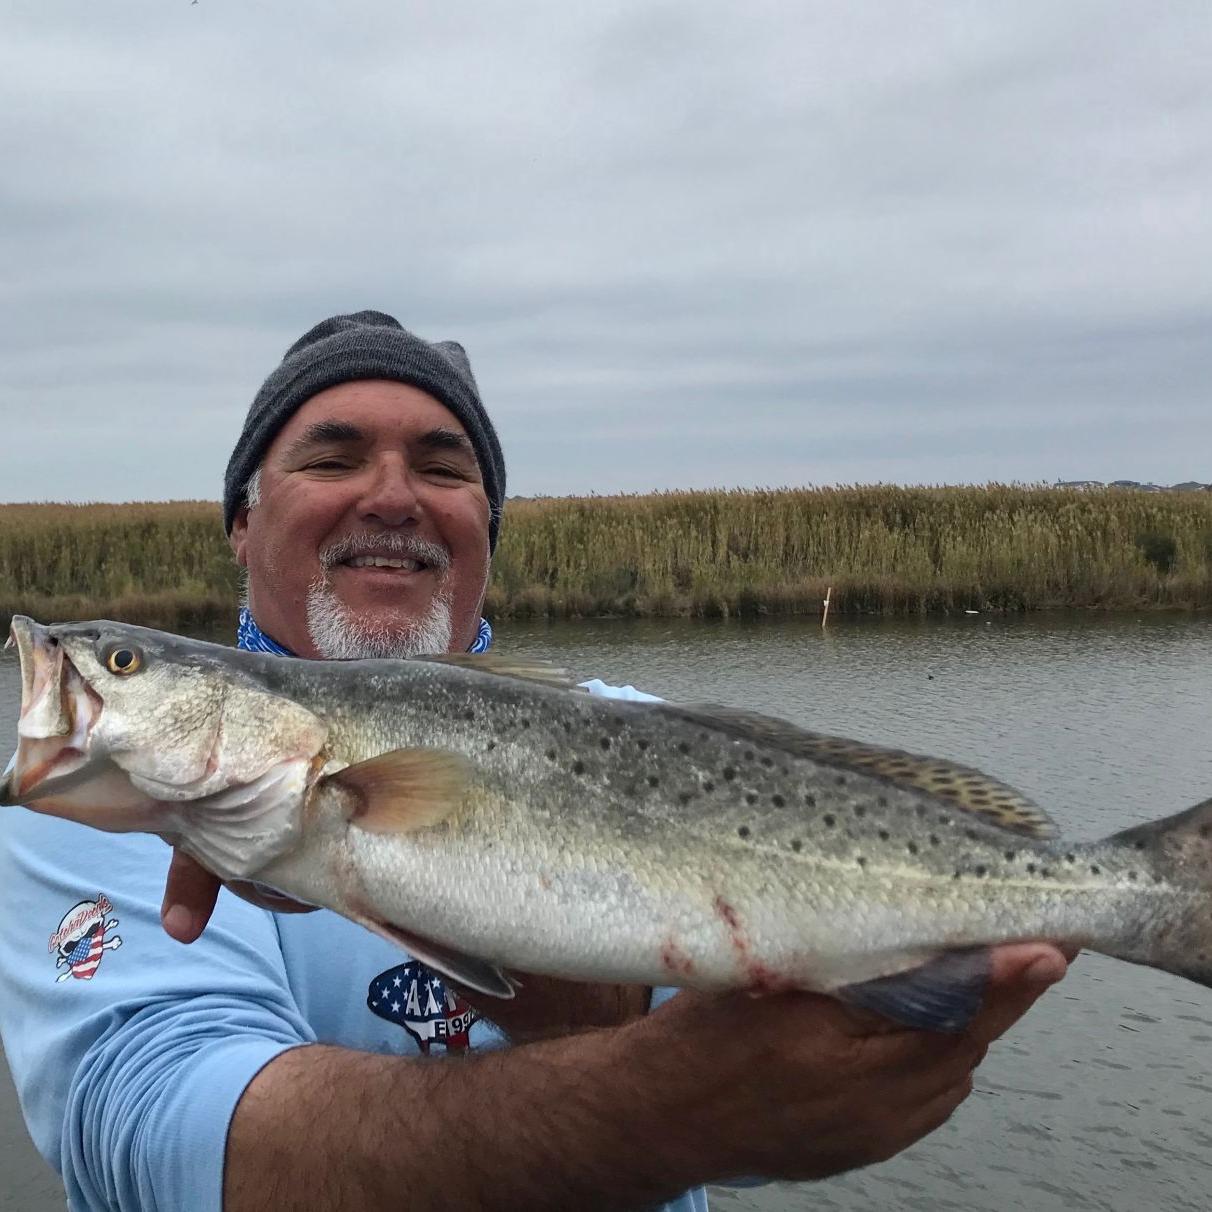 This channel is a winter wonderland for speckled trout